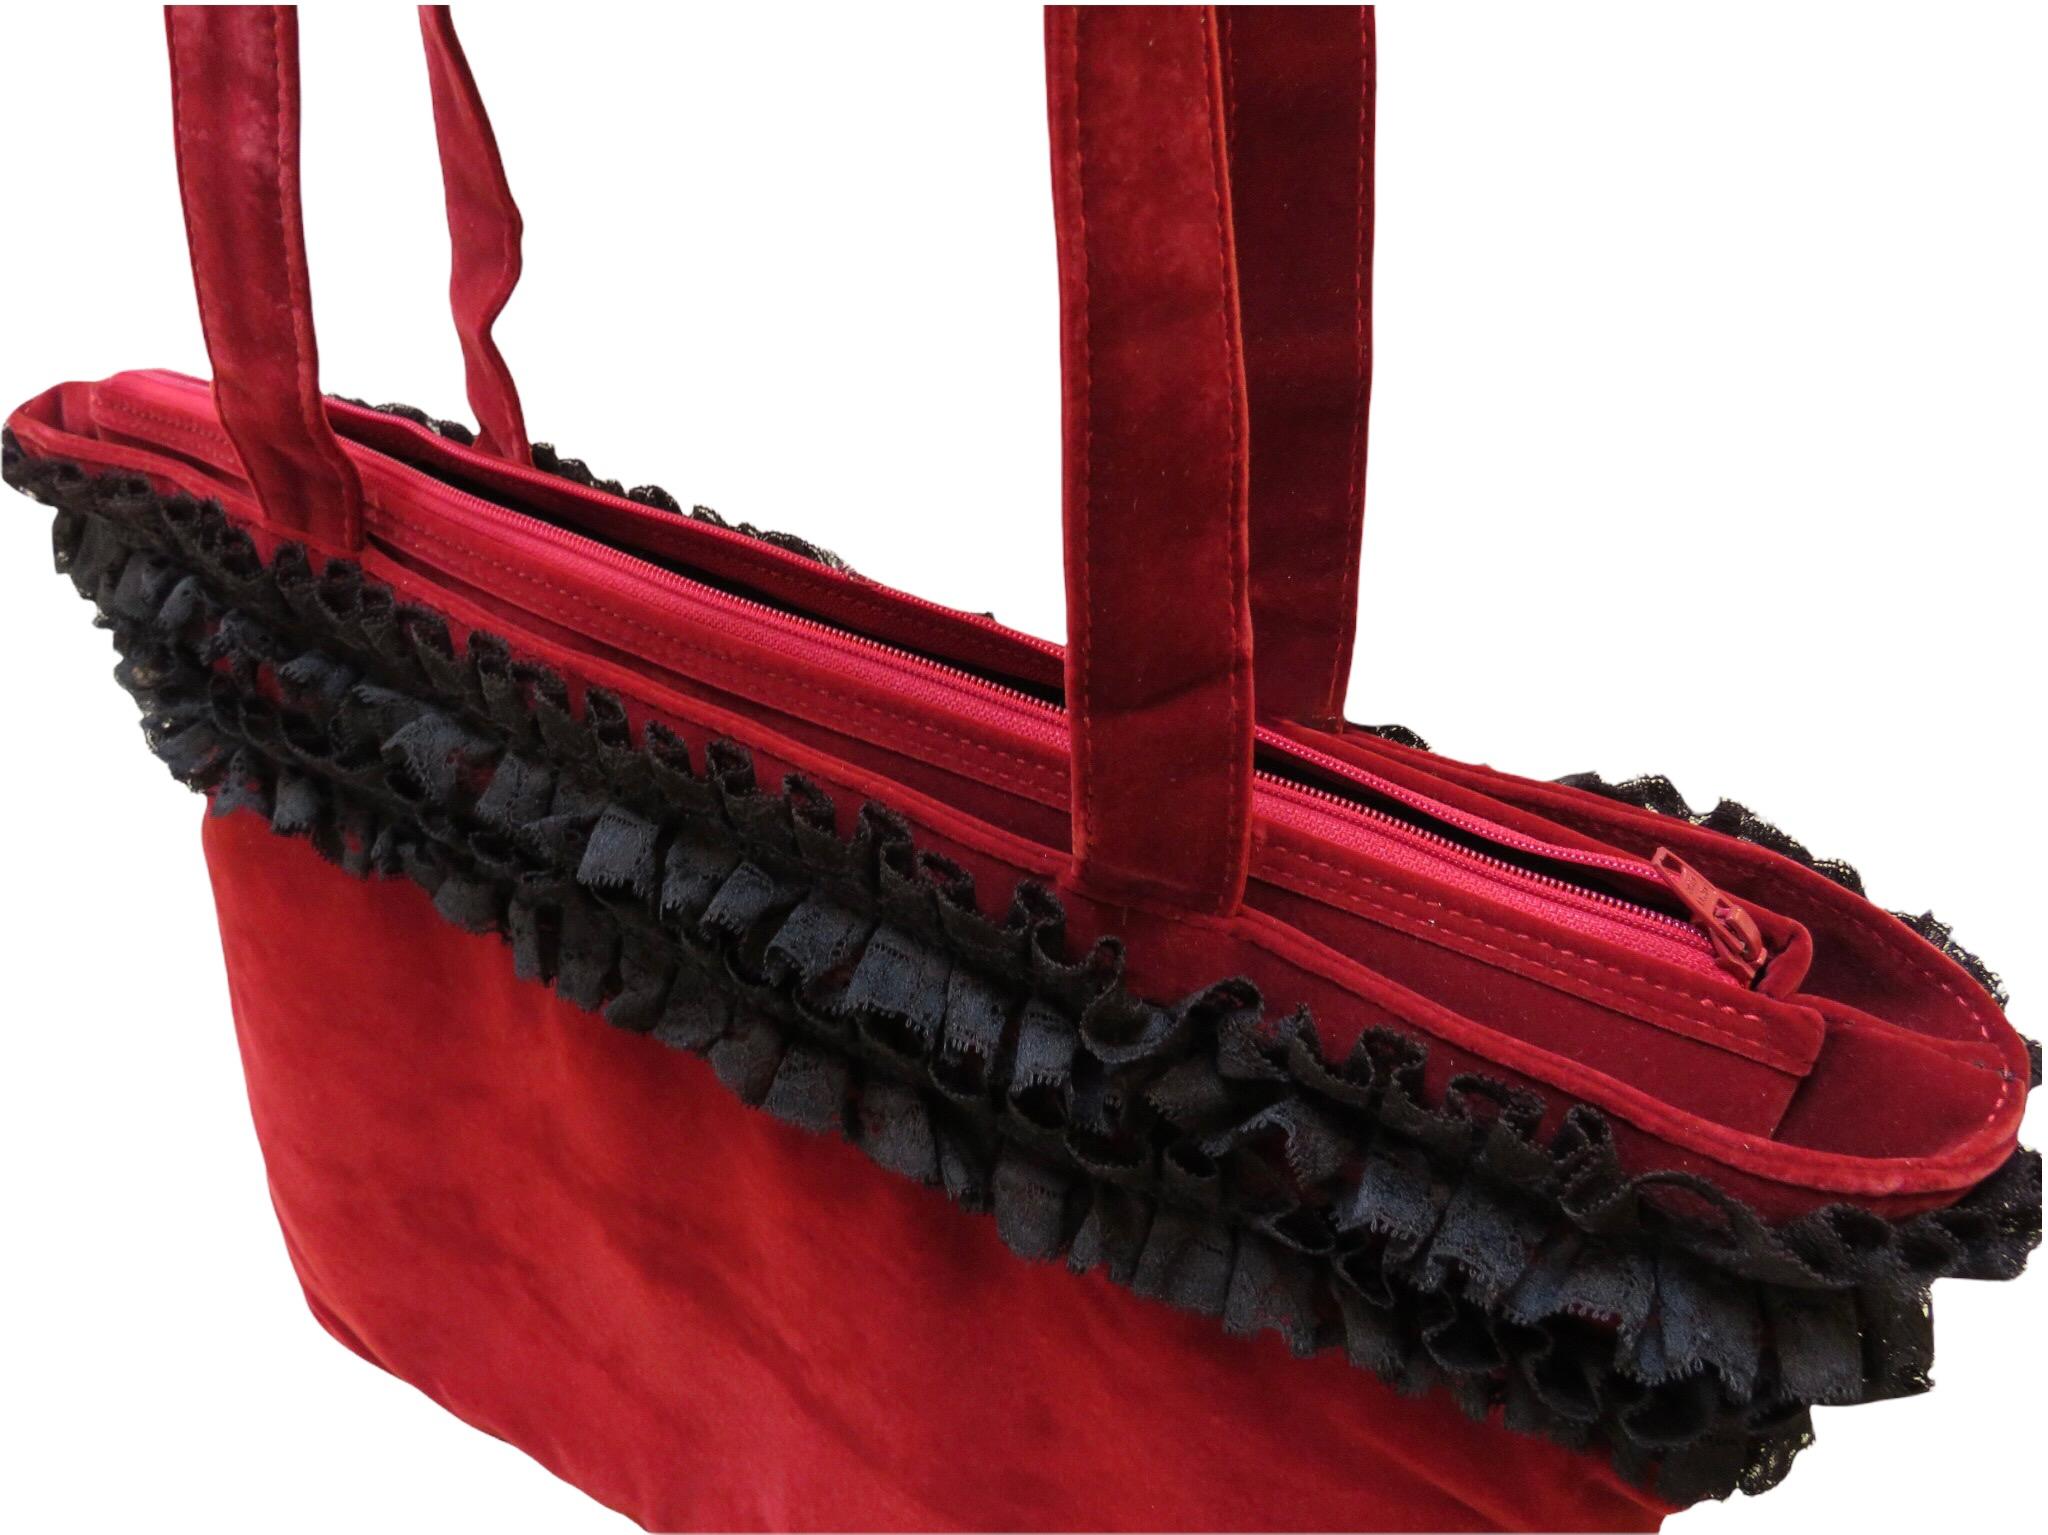 Chantal Thomass Red Velvet and Lace Shoulder Bag For Sale 1